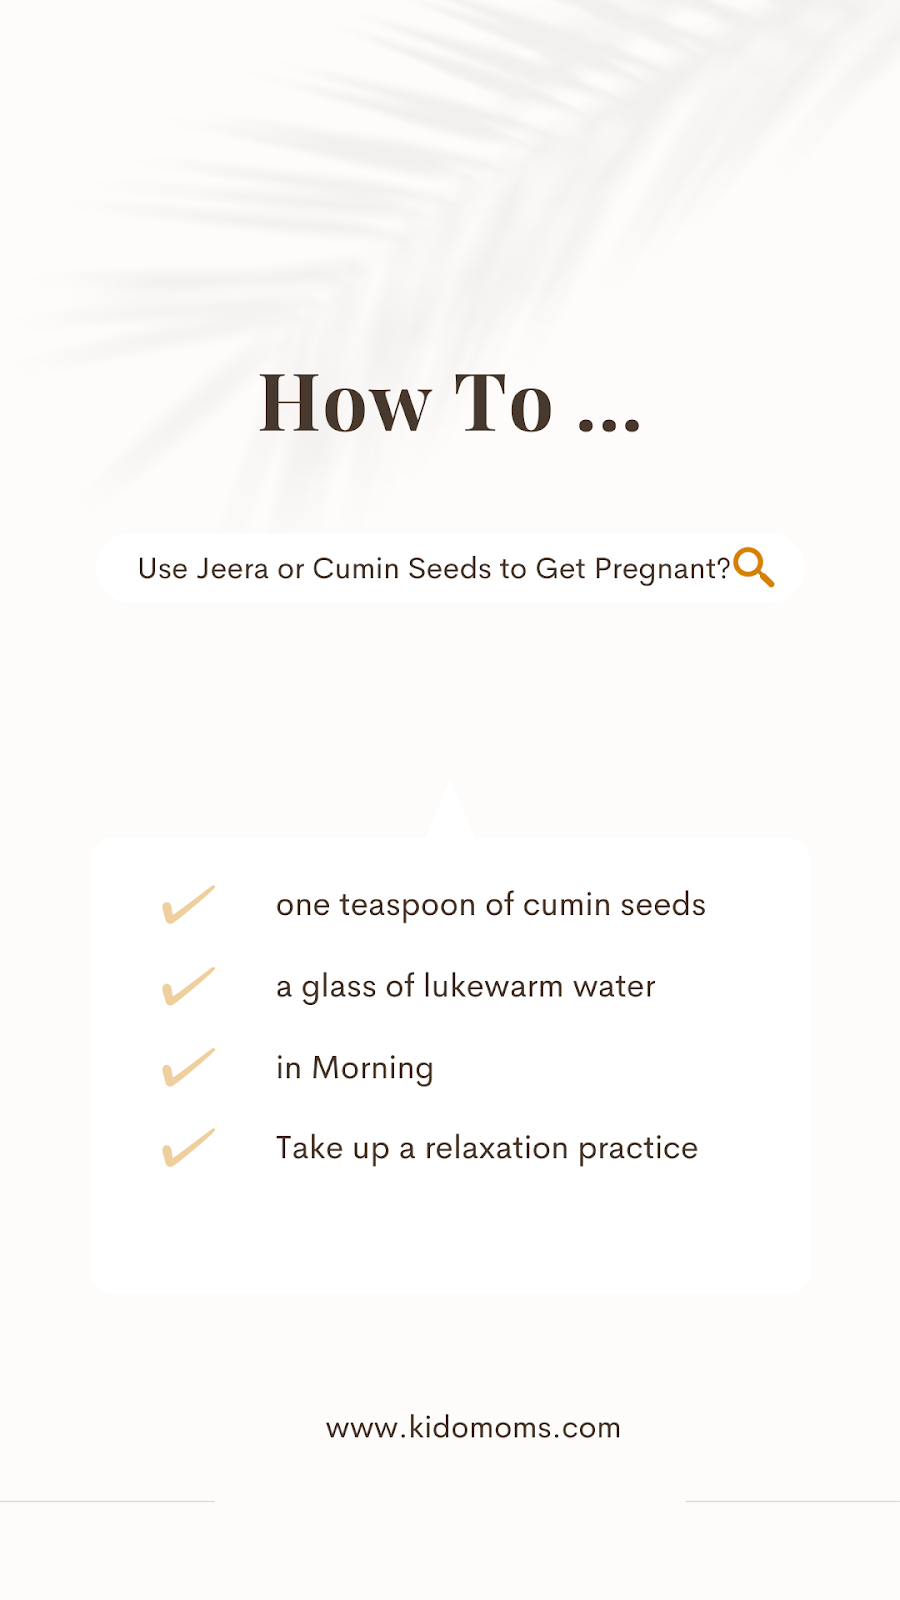 How to Use Jeera or Cumin Seeds to Get Pregnant?